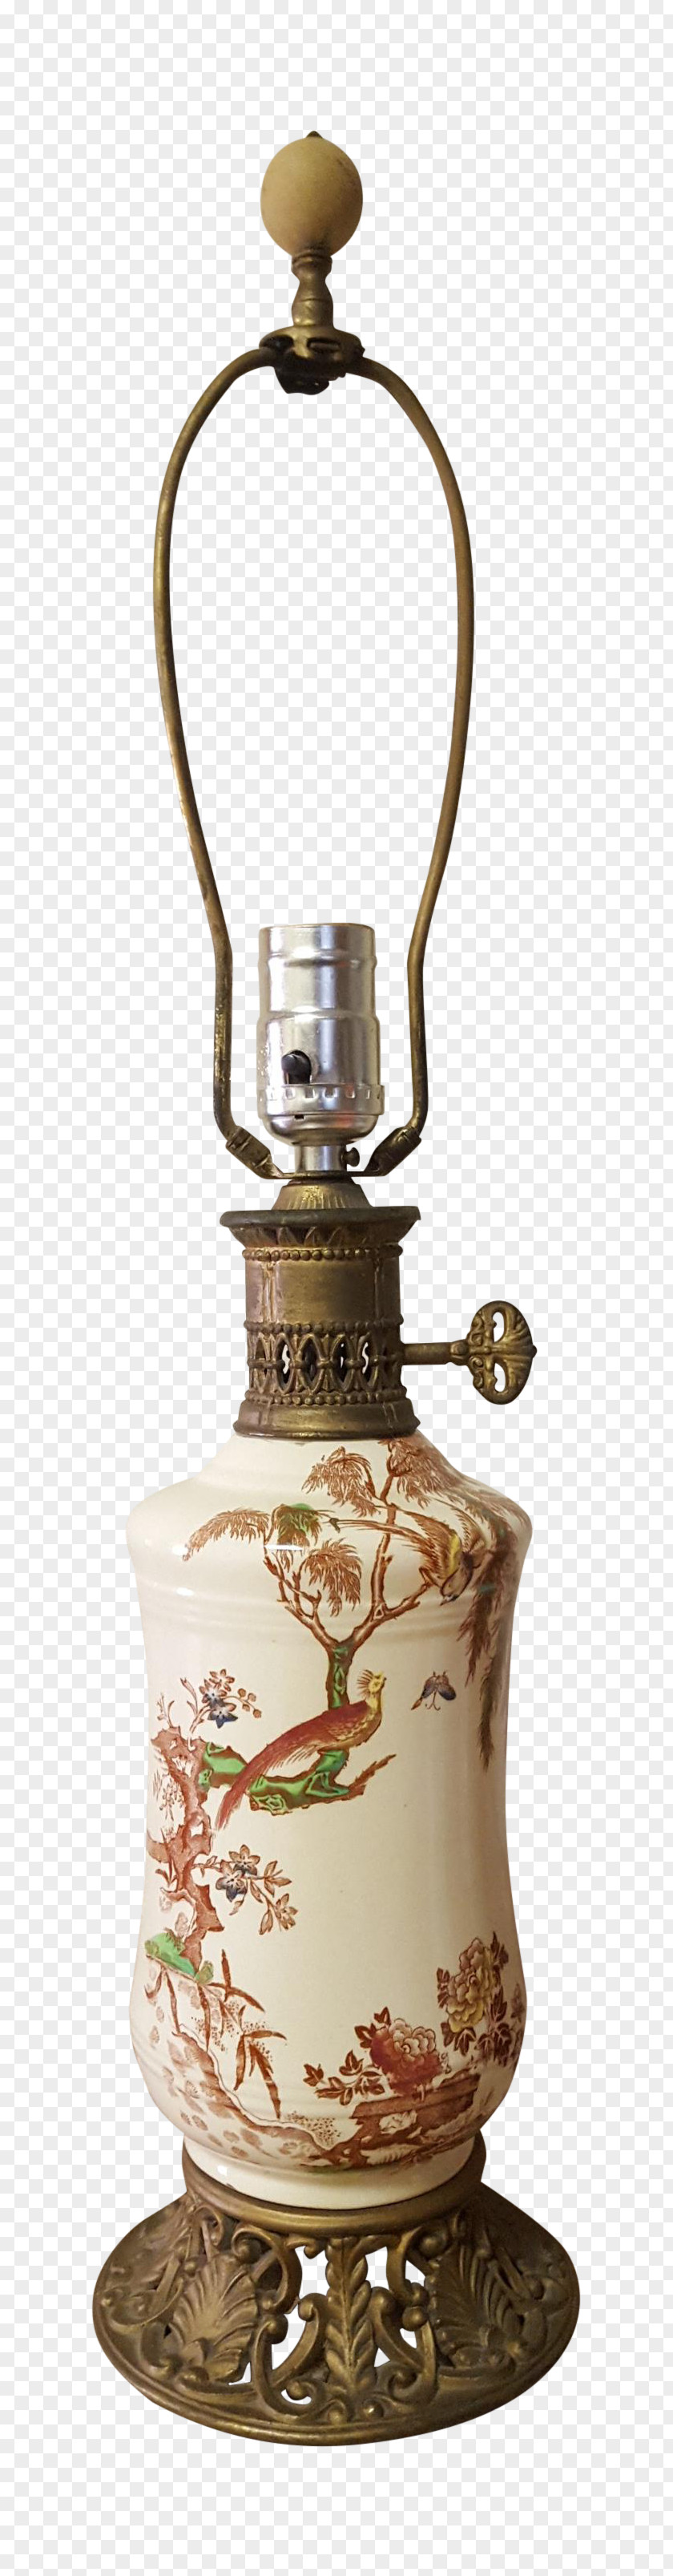 Hand-painted Lamp 01504 PNG